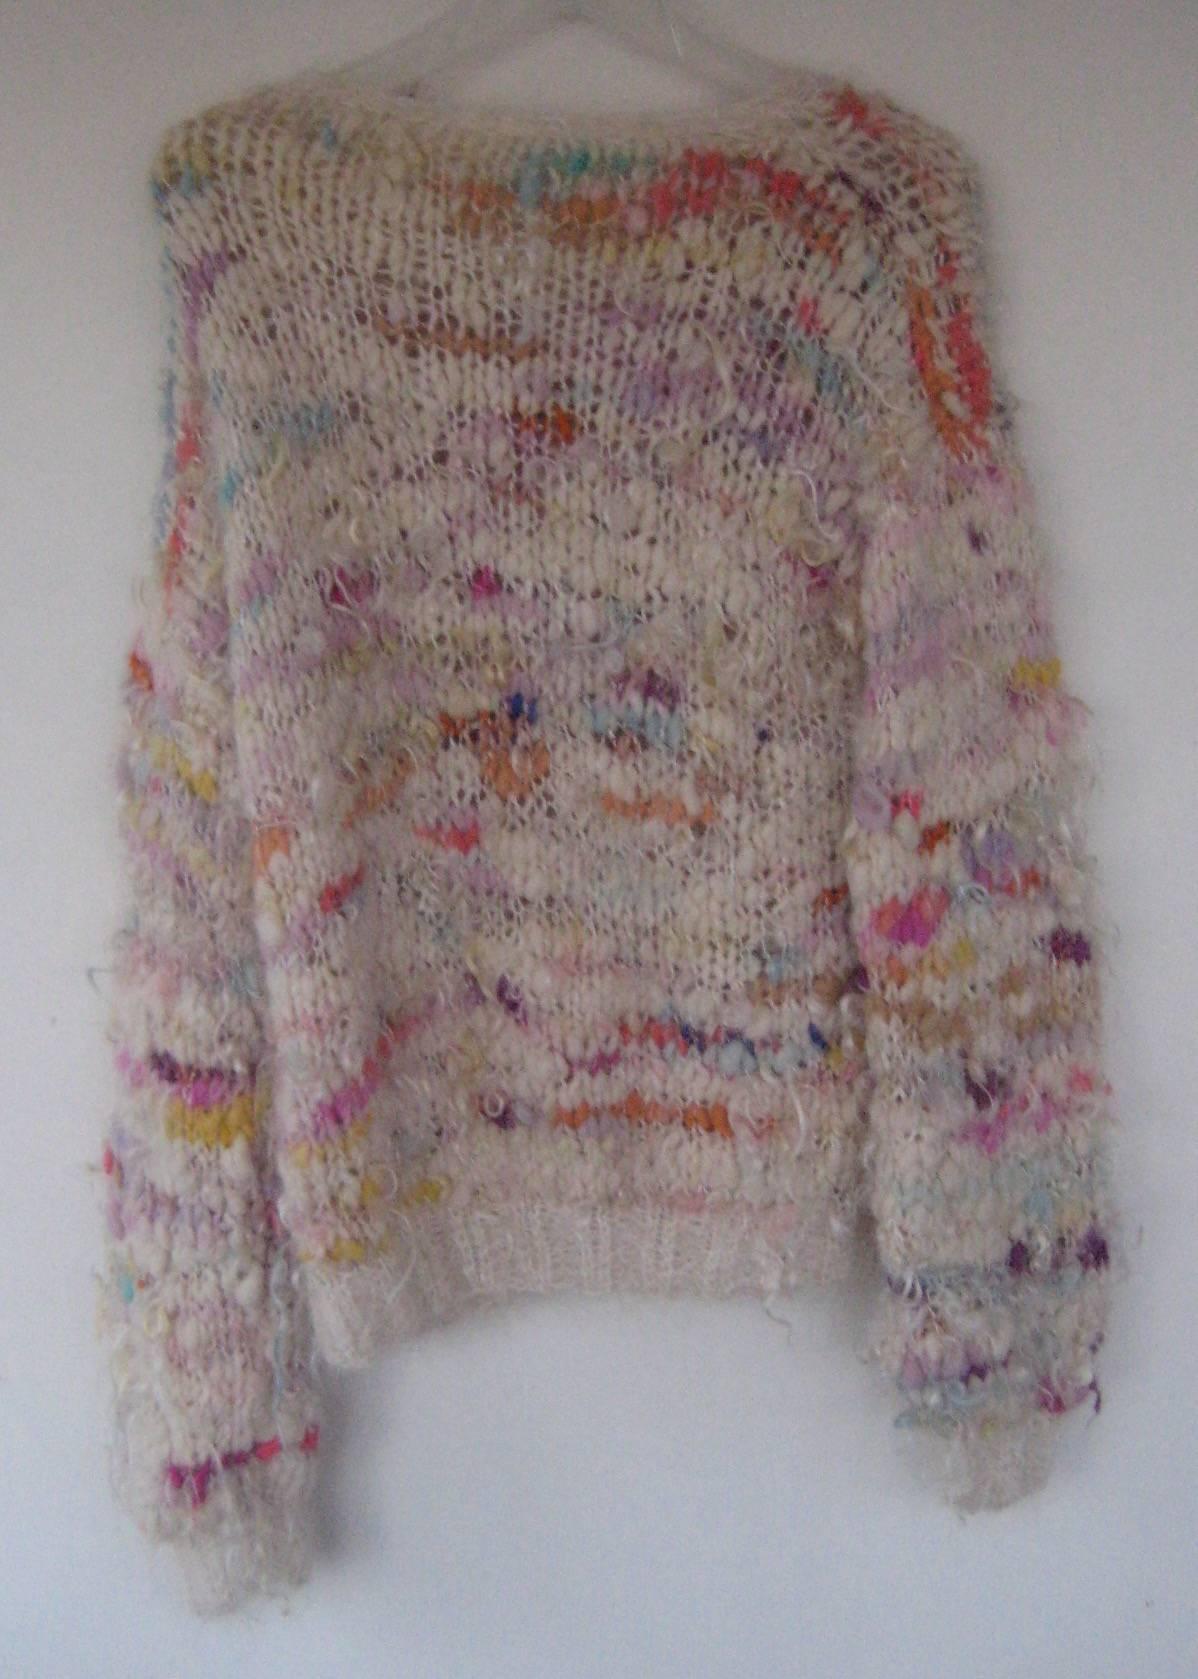 Incredible 1970s punk rock sweater
Hand knit in soft pastel hues
Wool and mohair
Excellent condition , looks unworn
